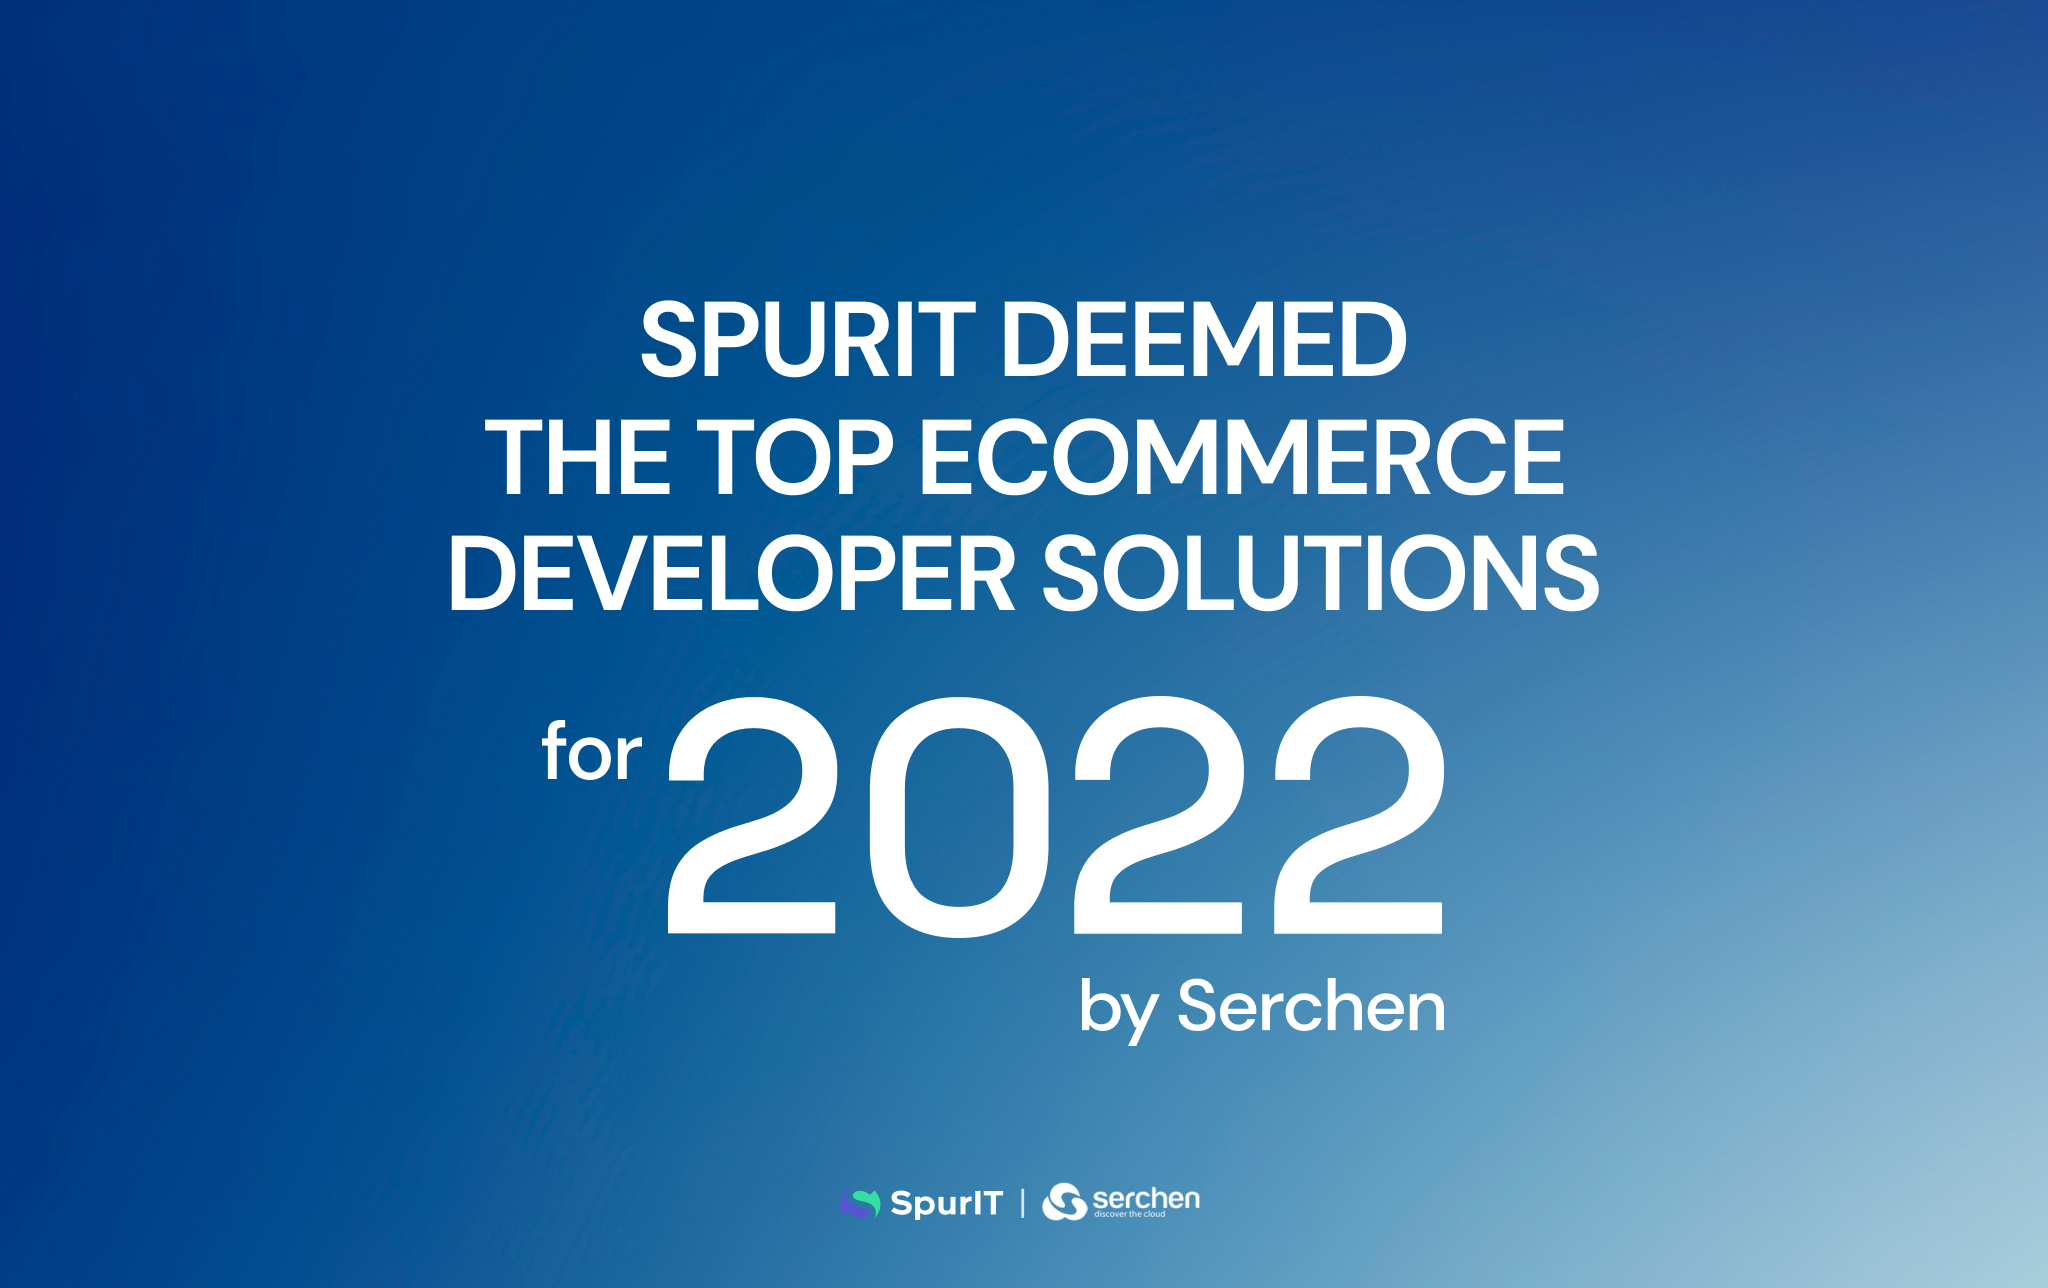 SpurIT deemed the top eCommerce developer solutions for 2022 by Serchen